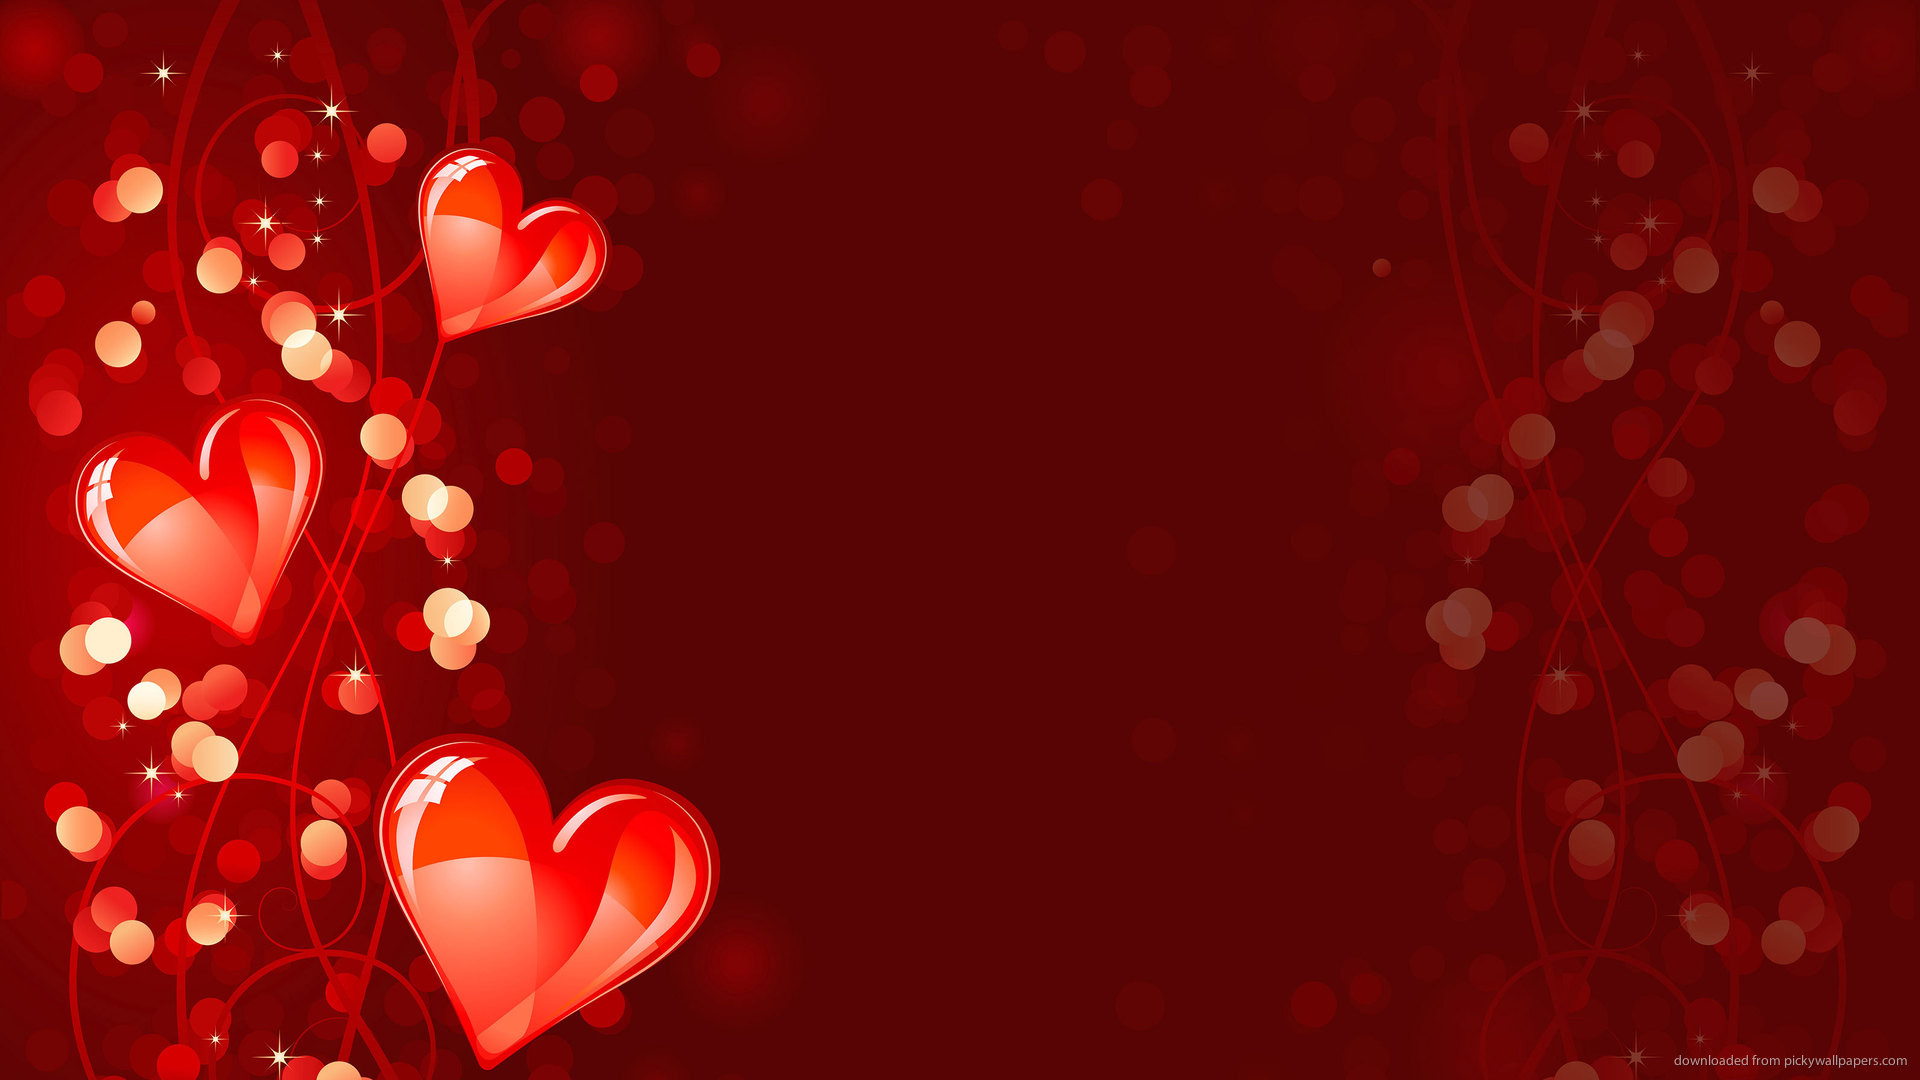 IPad, Valentines Day Hearts Beckground Screensaver For Kindle3 And DX